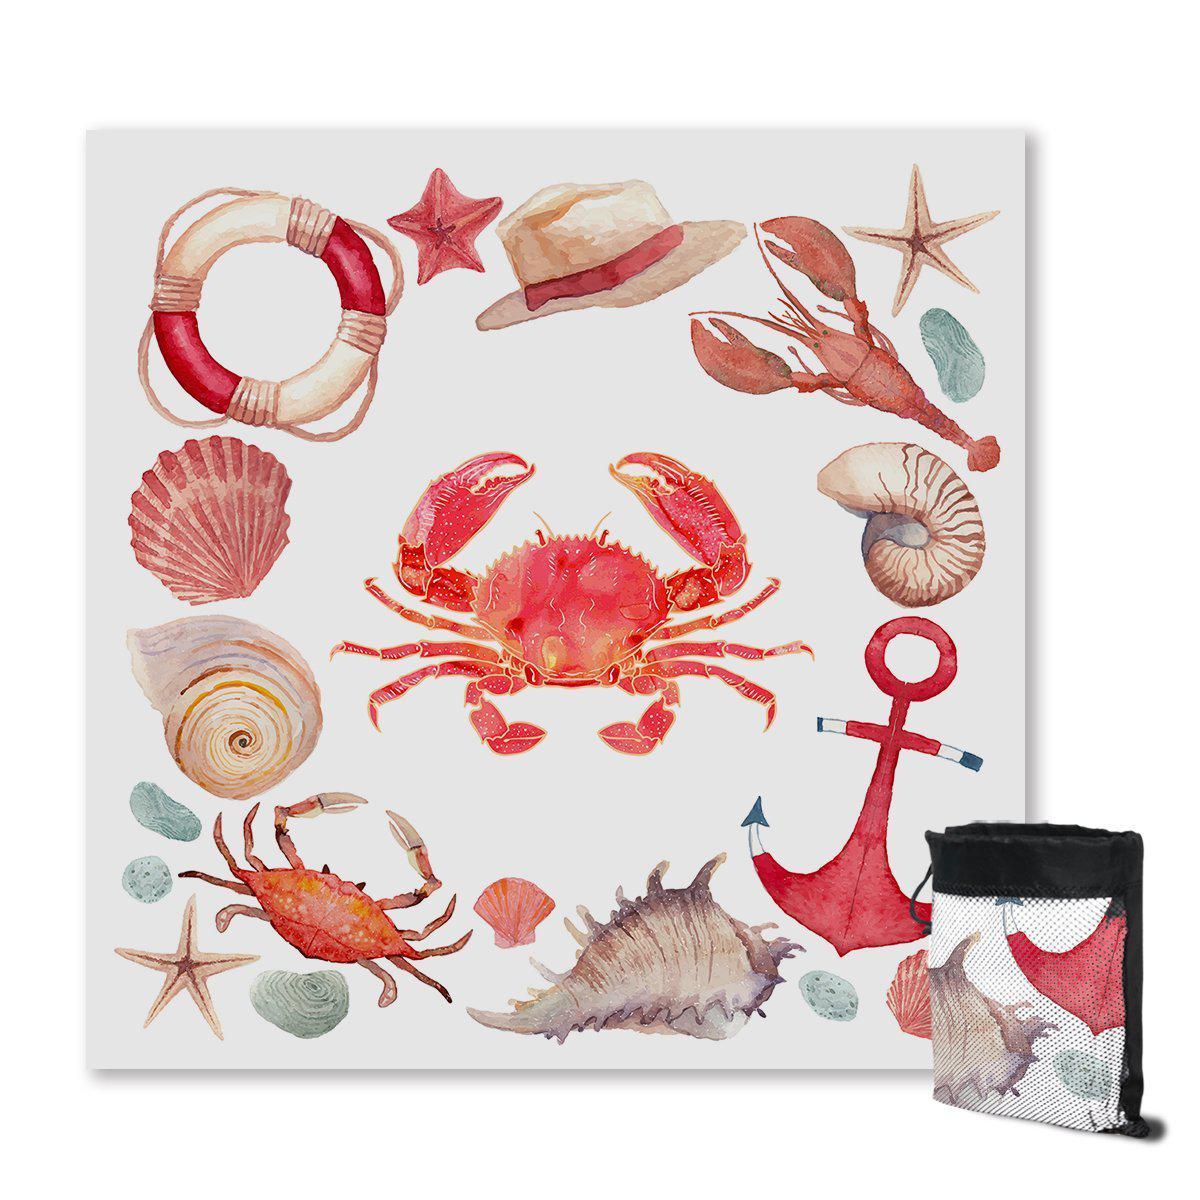 The Red Crab Sand Free Towel